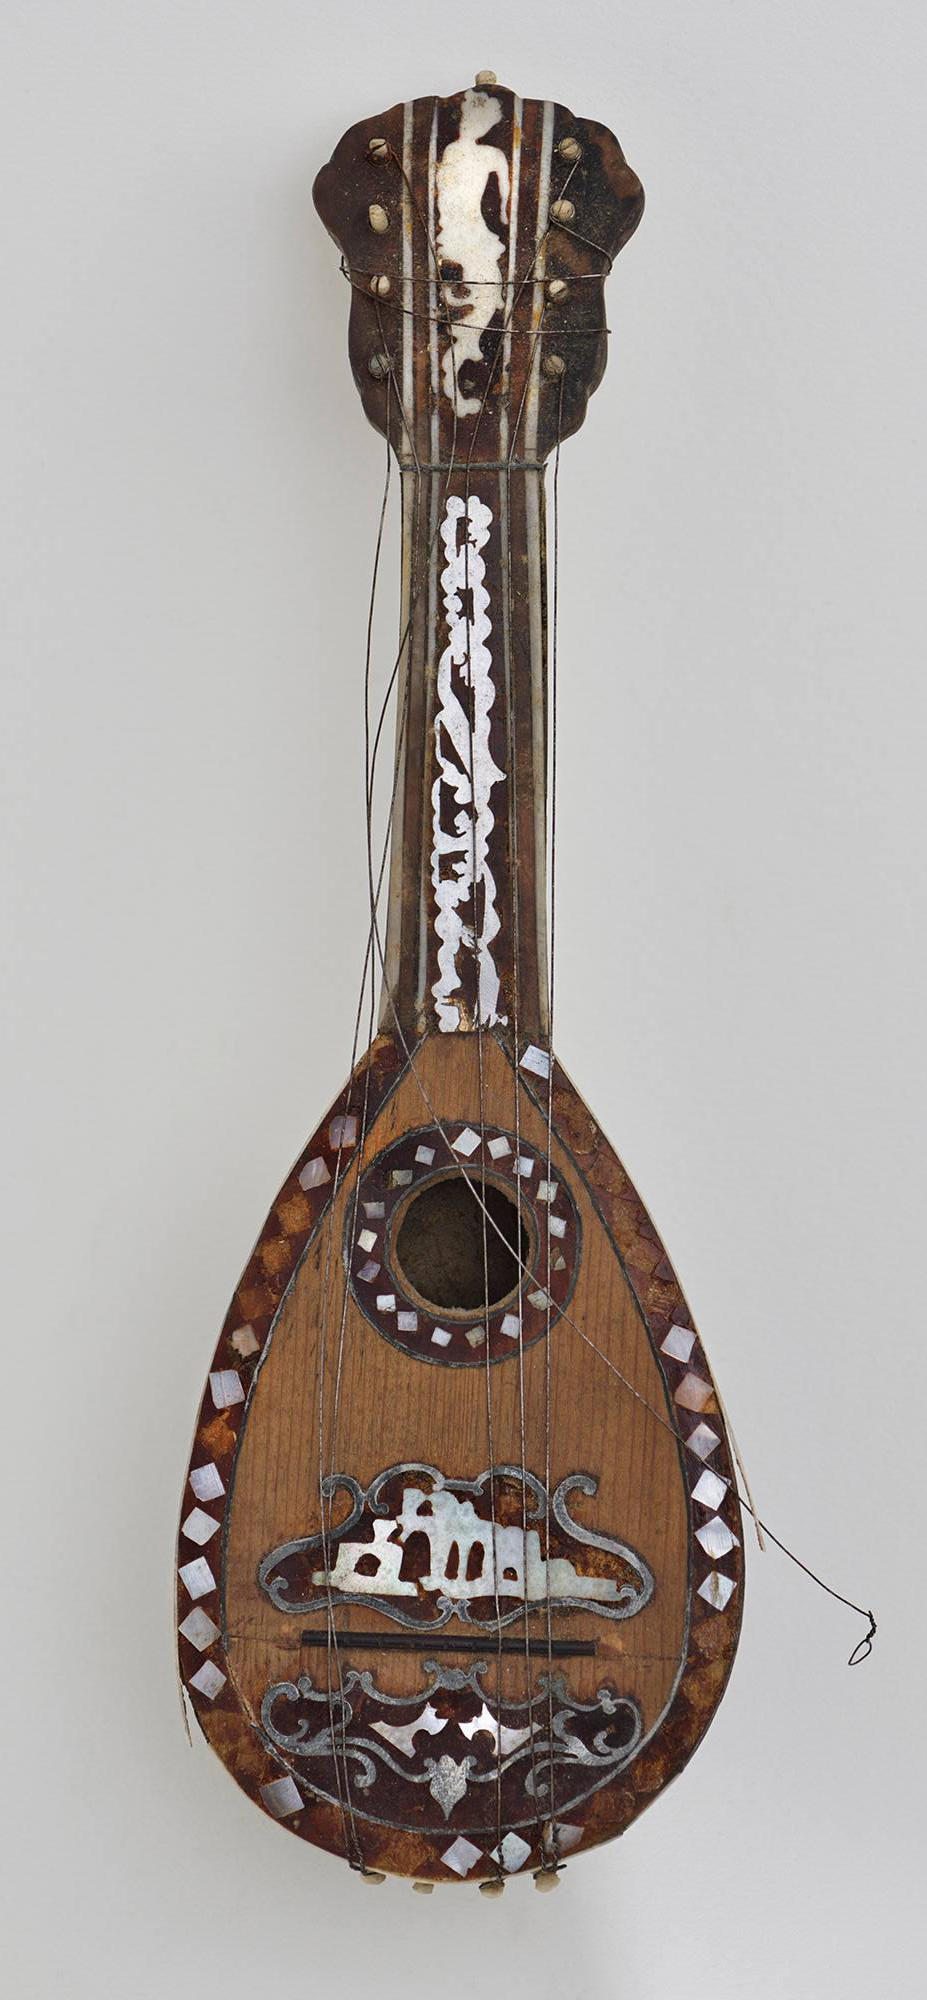 A miniature stringed instrument at the Isabella Stewart Gardner Museum made of wood and tortoise shell, with mother-of-pearl designs shown before conservation.